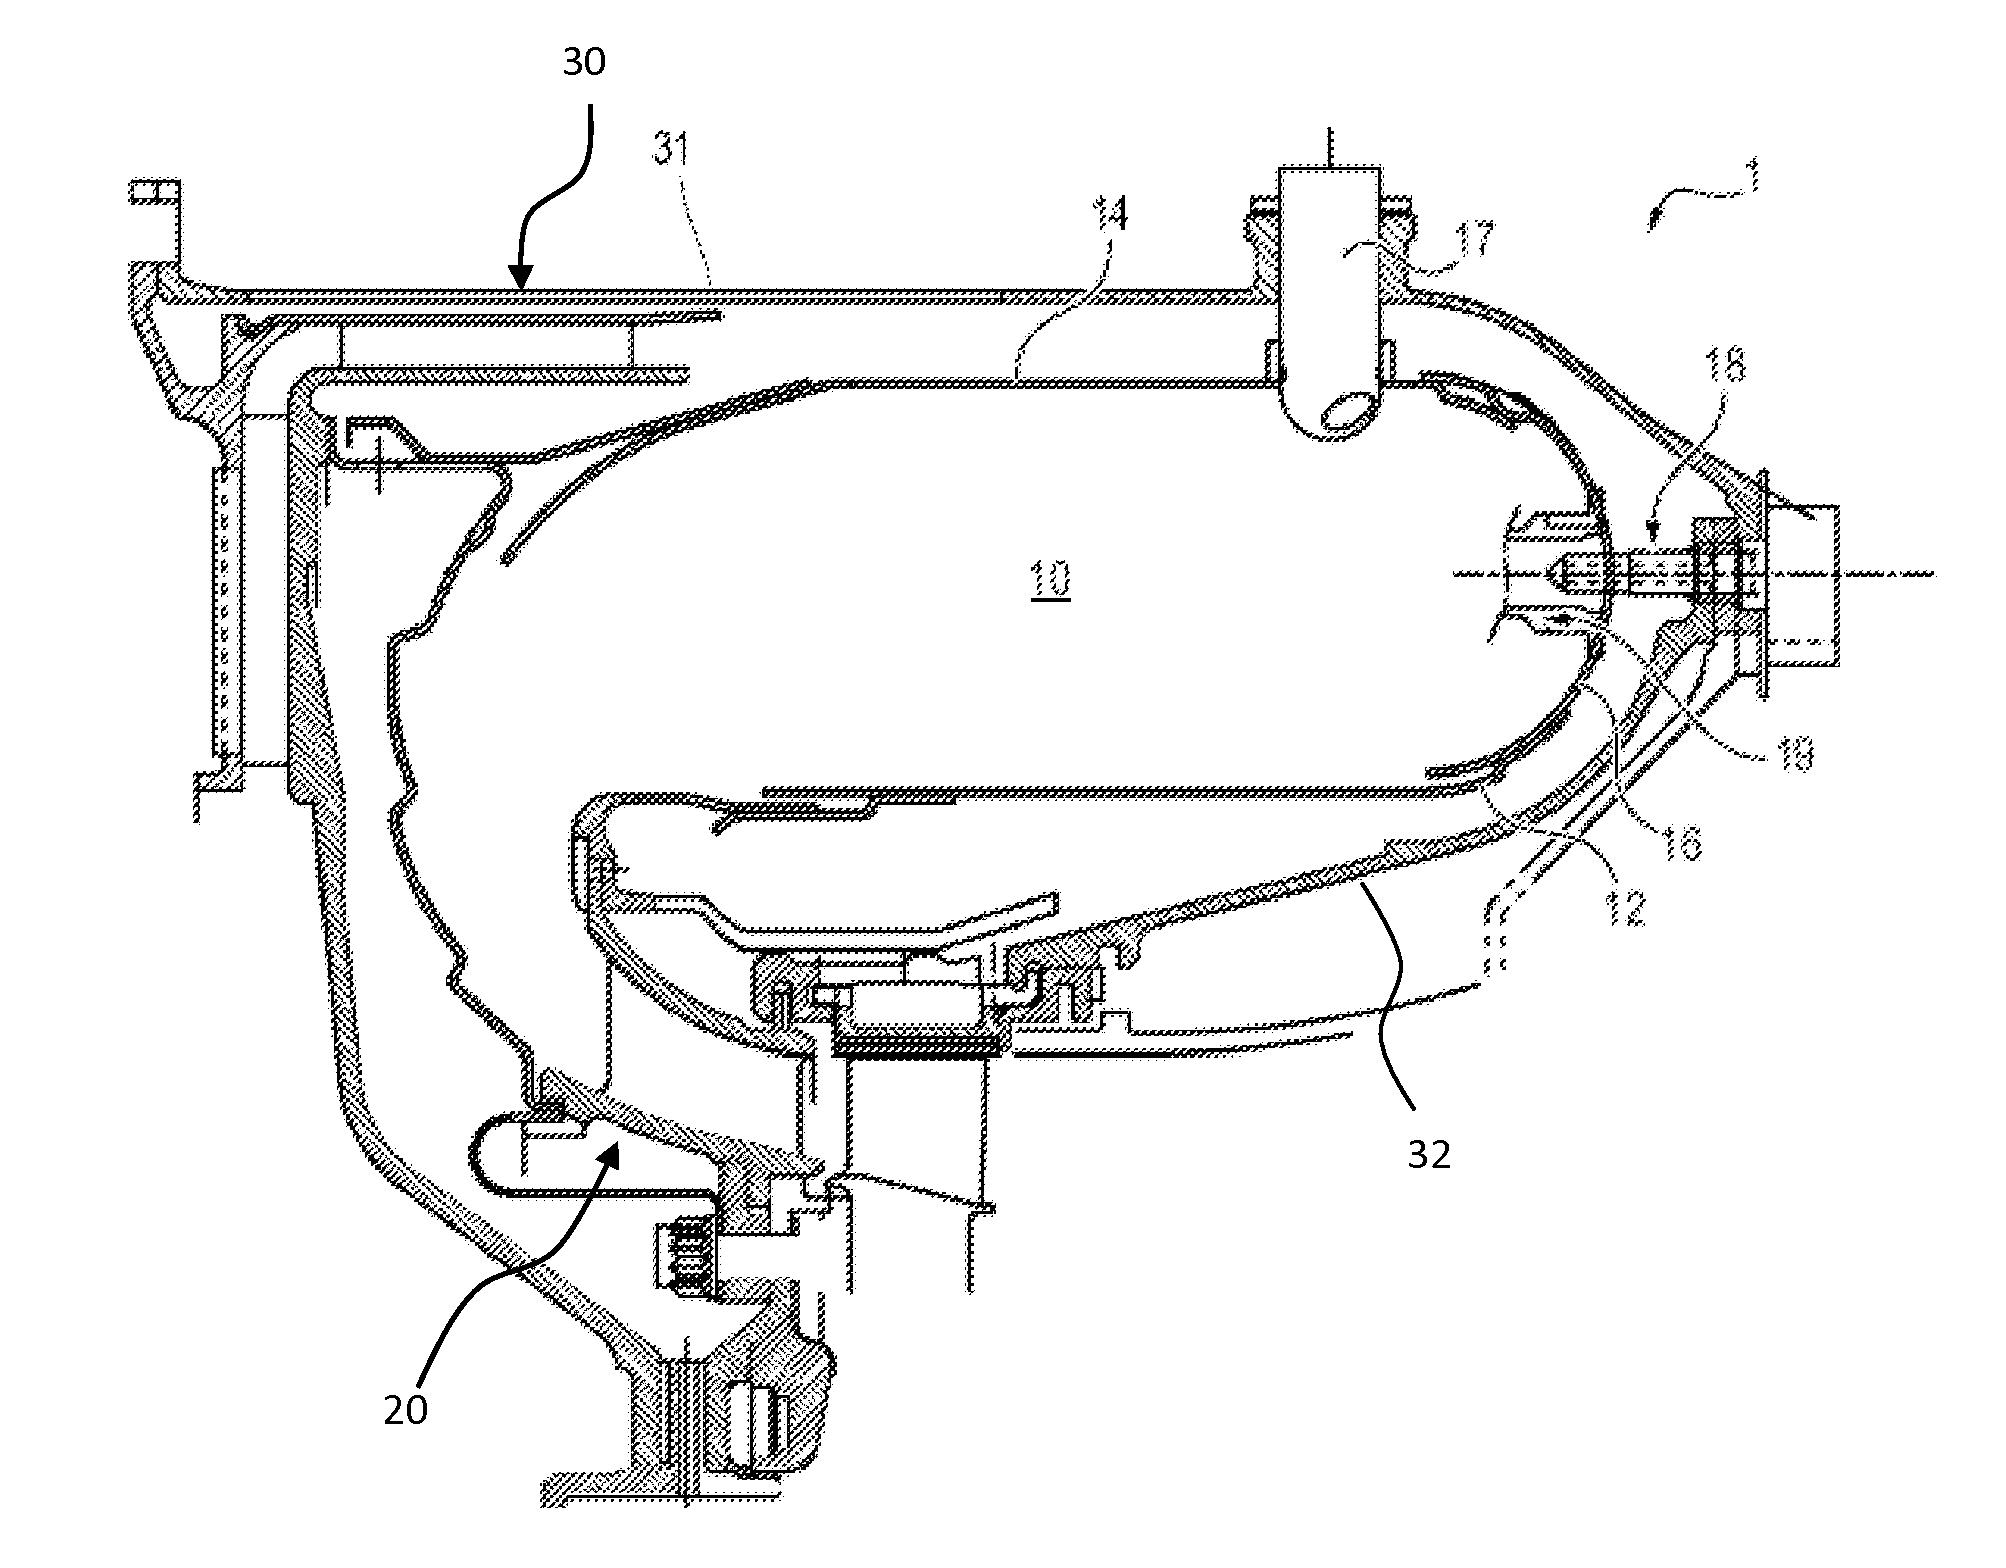 Turbo machine combustion assembly comprising an improved fuel supply circuit